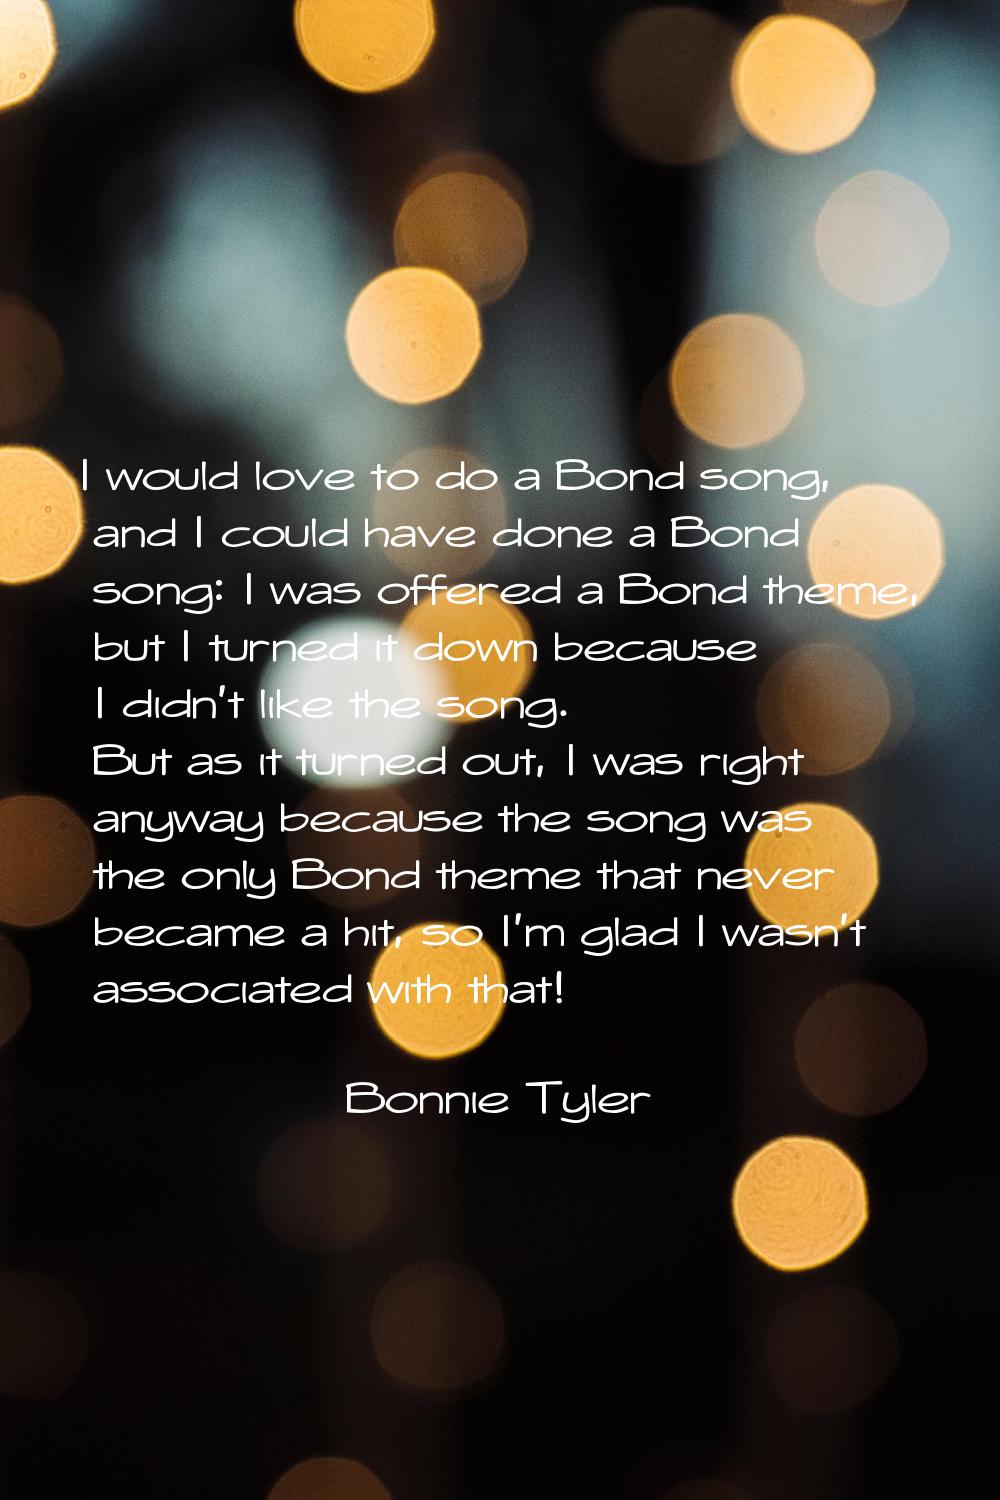 I would love to do a Bond song, and I could have done a Bond song: I was offered a Bond theme, but 